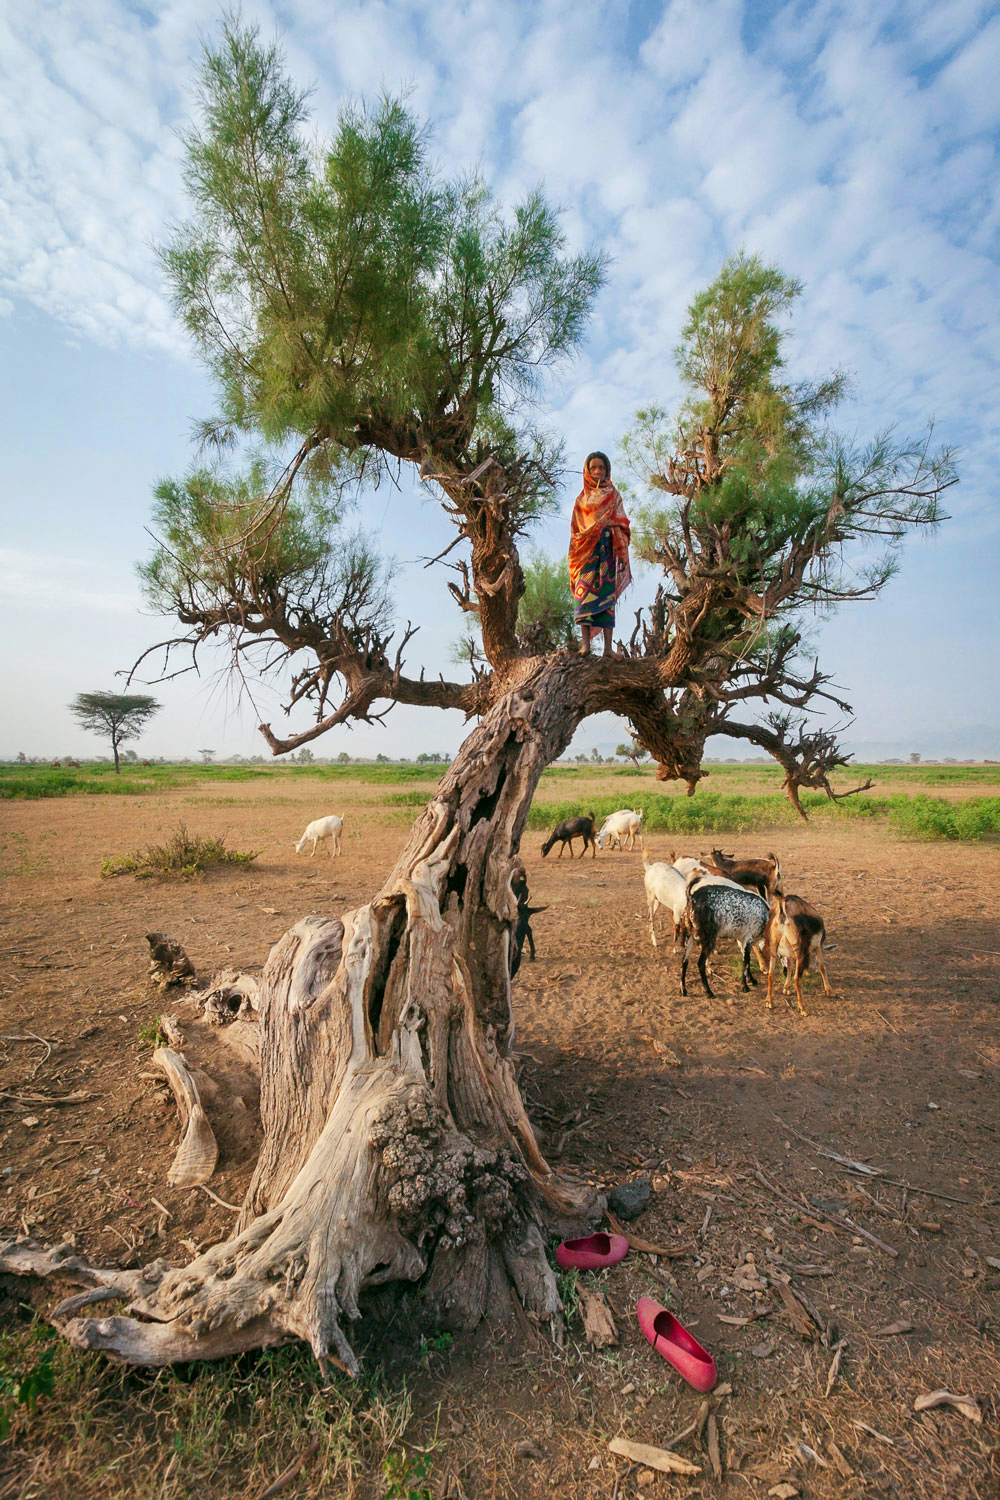  Asalmahi watches the family’s goats from up in a tree; Afar, Ethiopia 